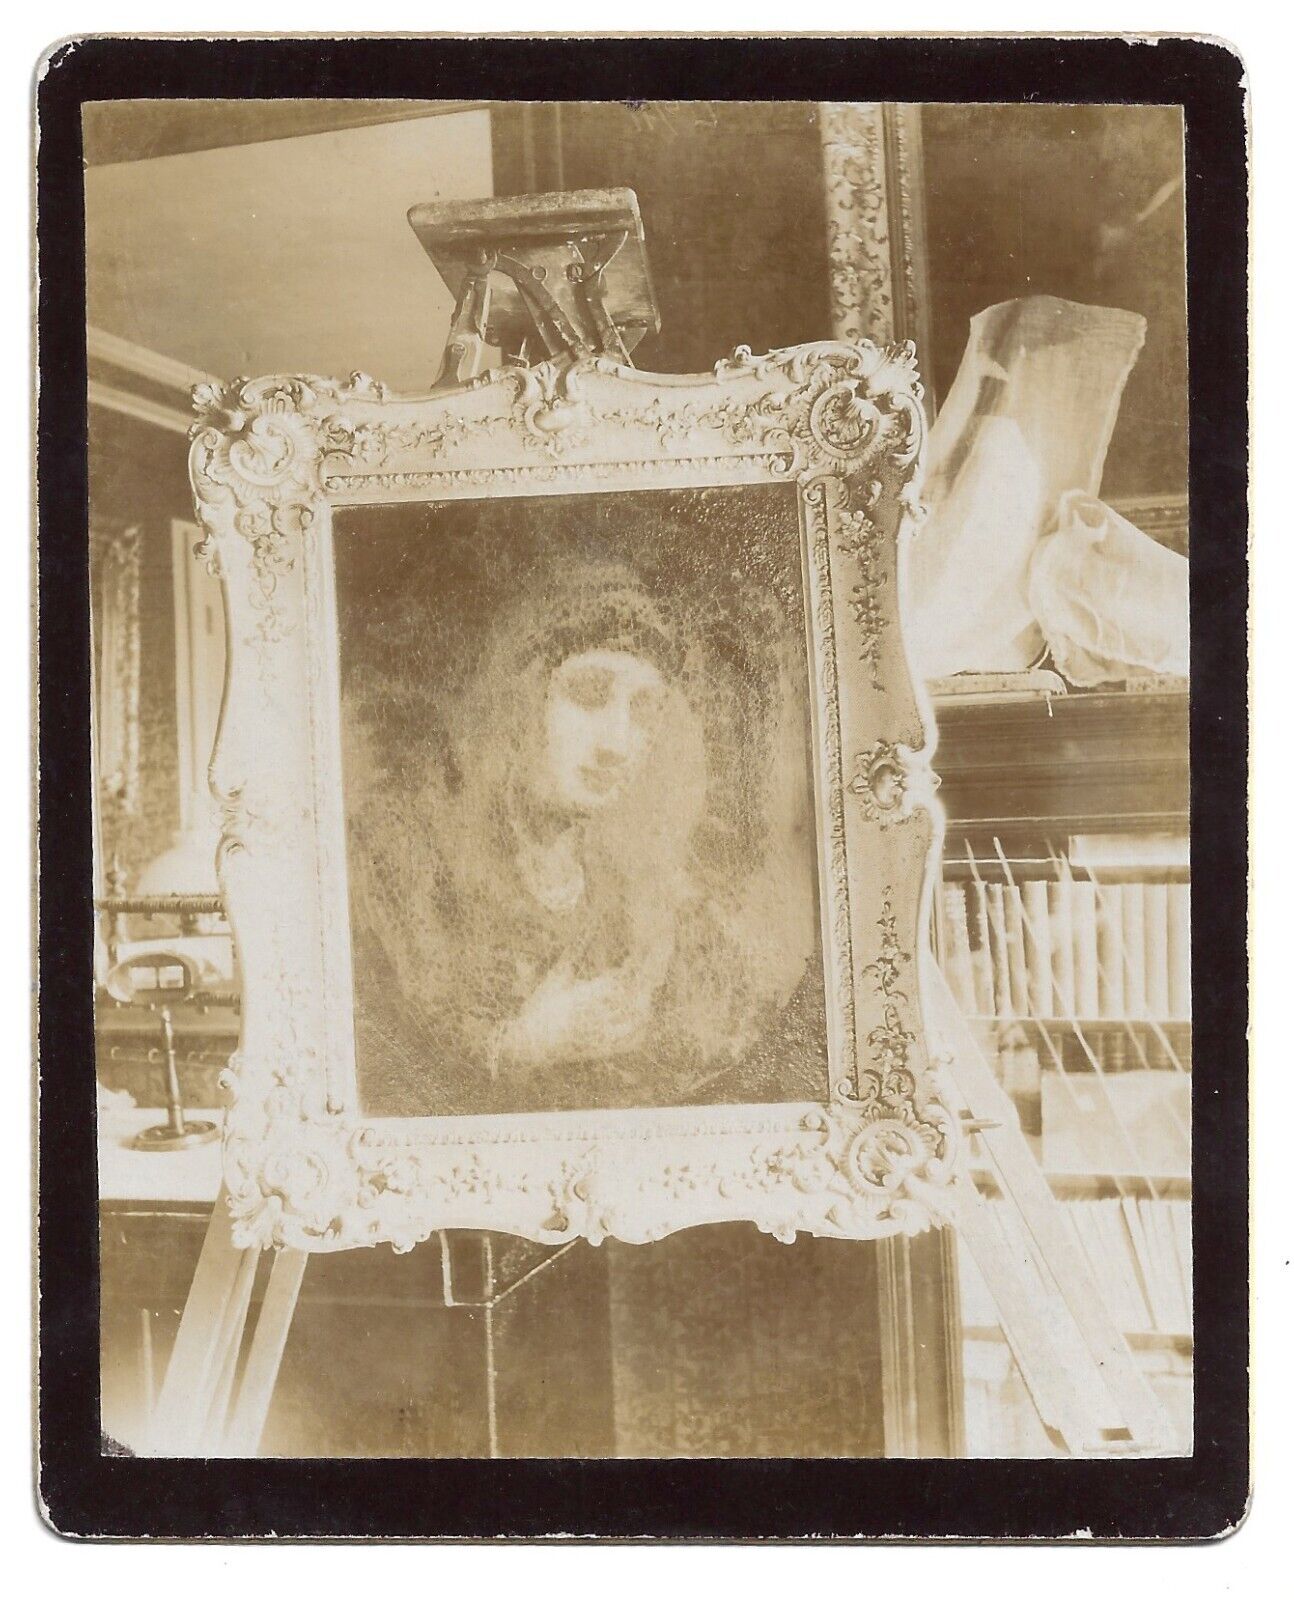 Early Kodak Photo of a Painting, With Stereoviewer In Background, Antique 1890s